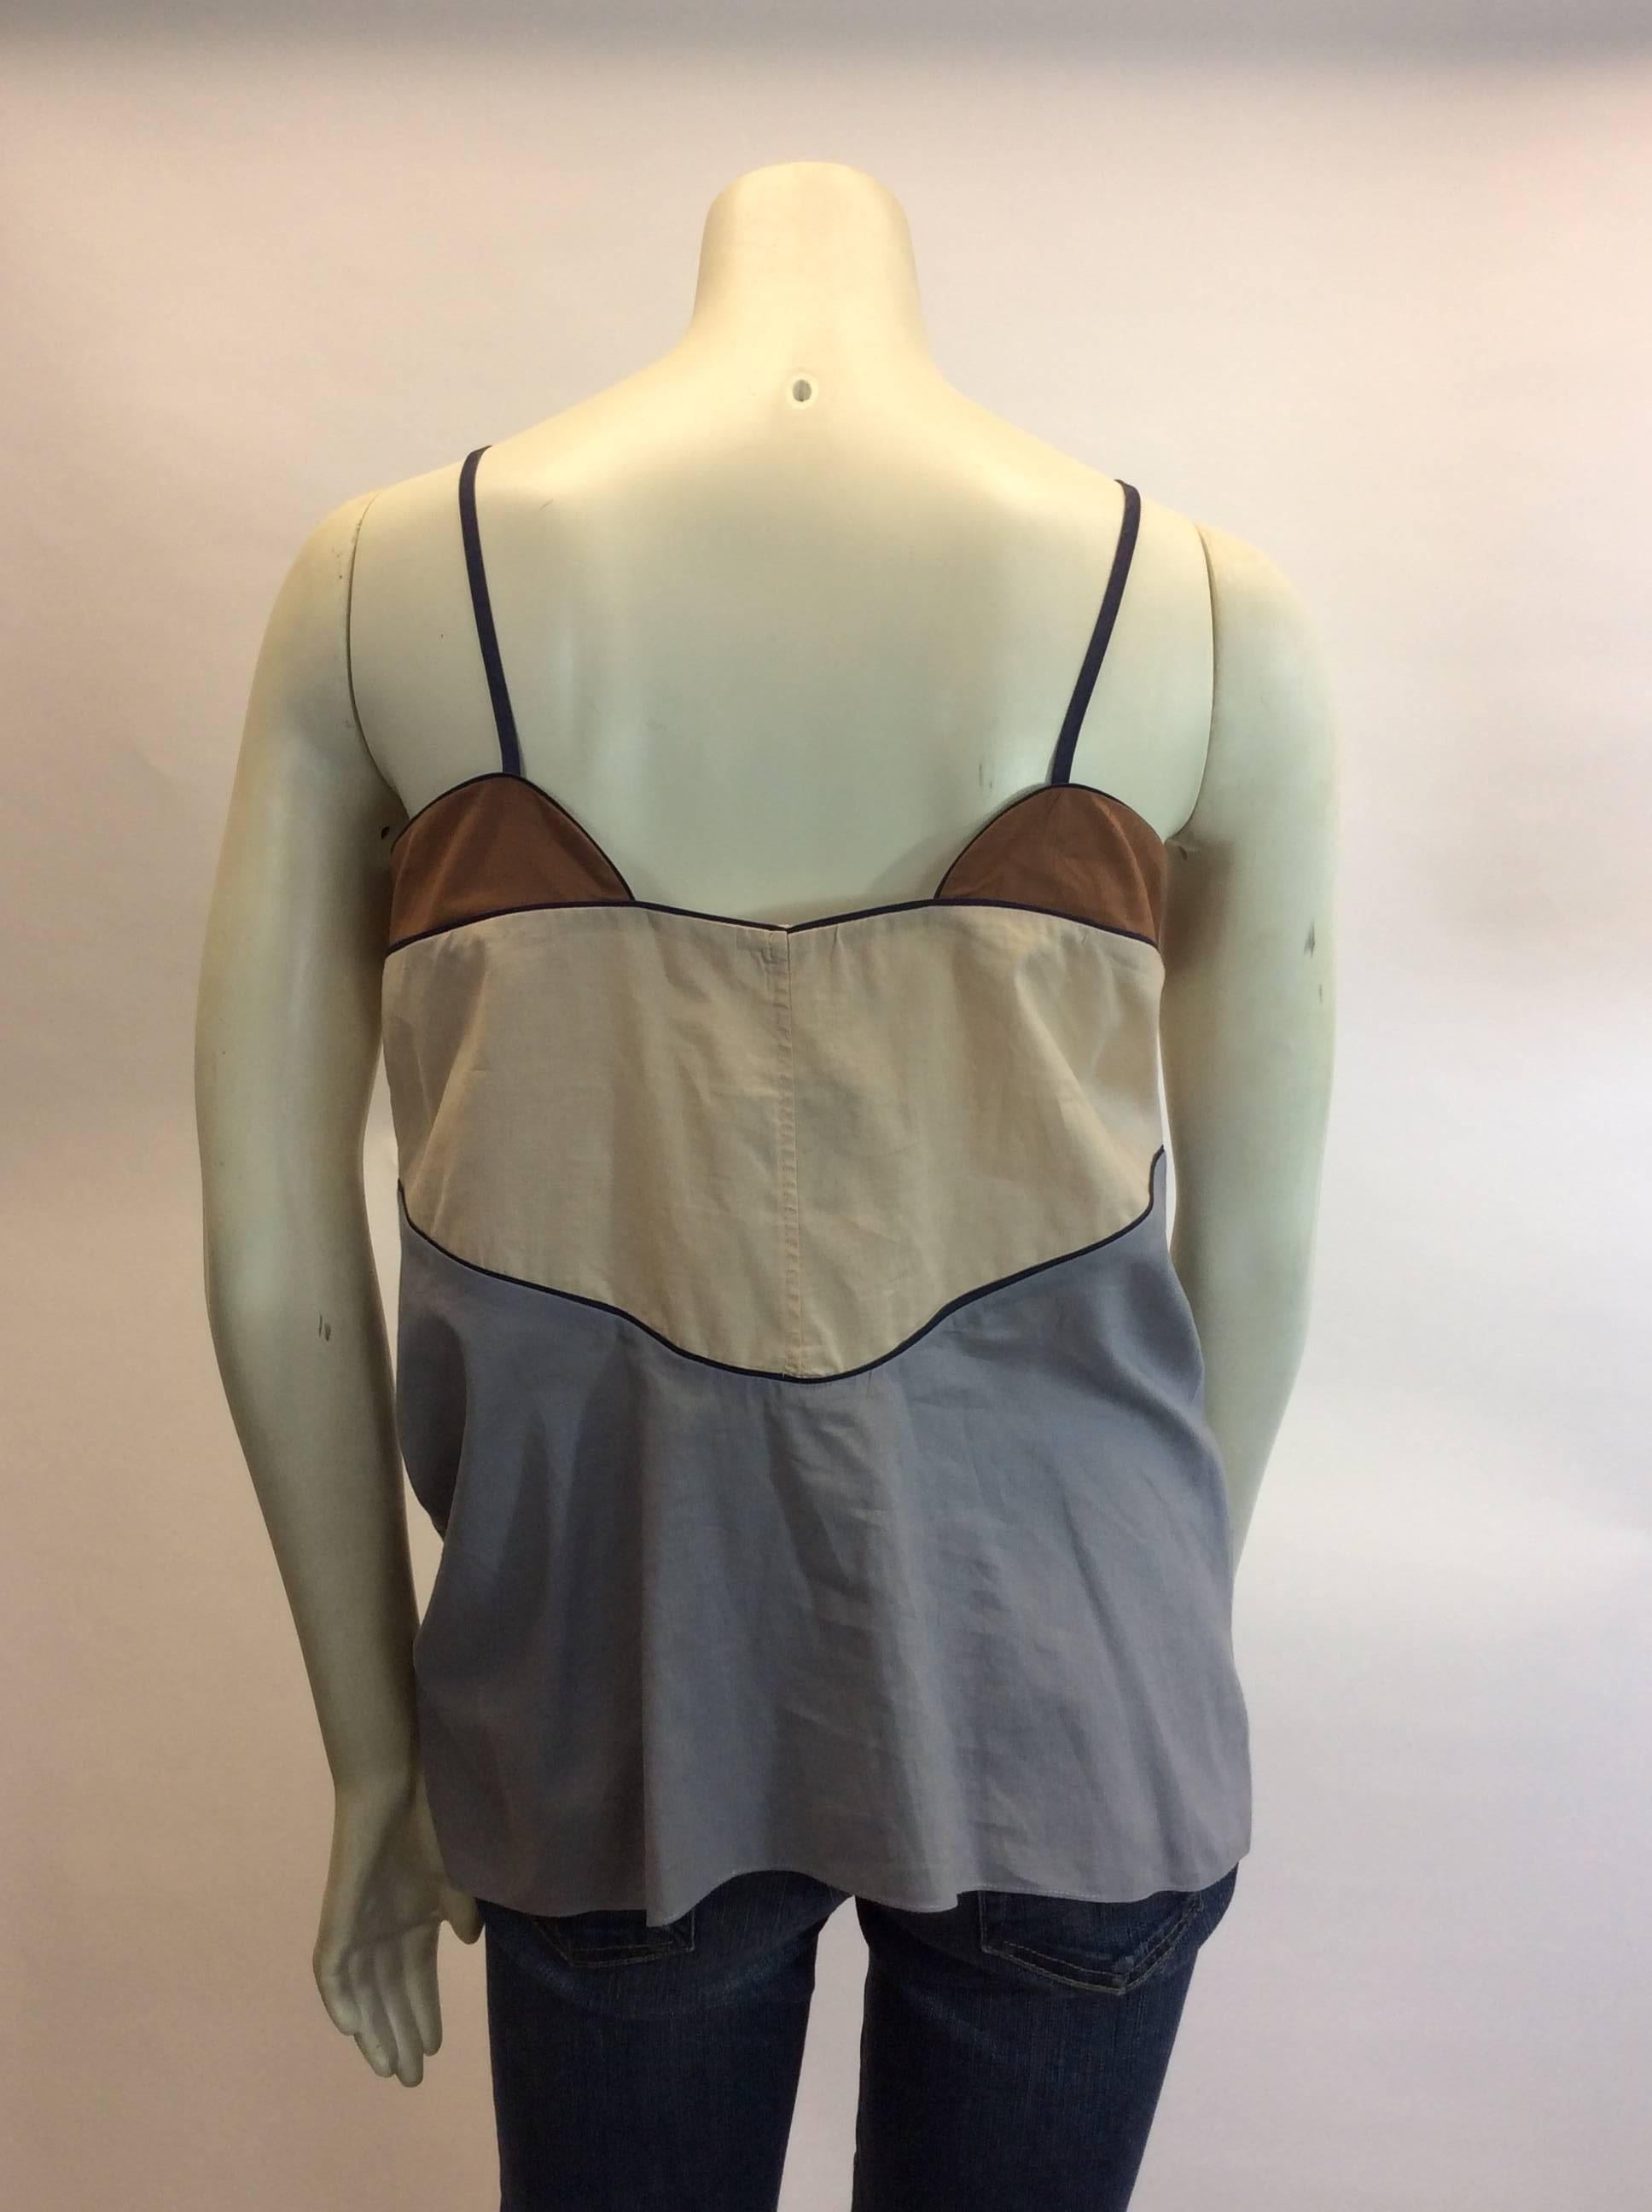 Marni Navy Trim Tank Top In Excellent Condition For Sale In Narberth, PA